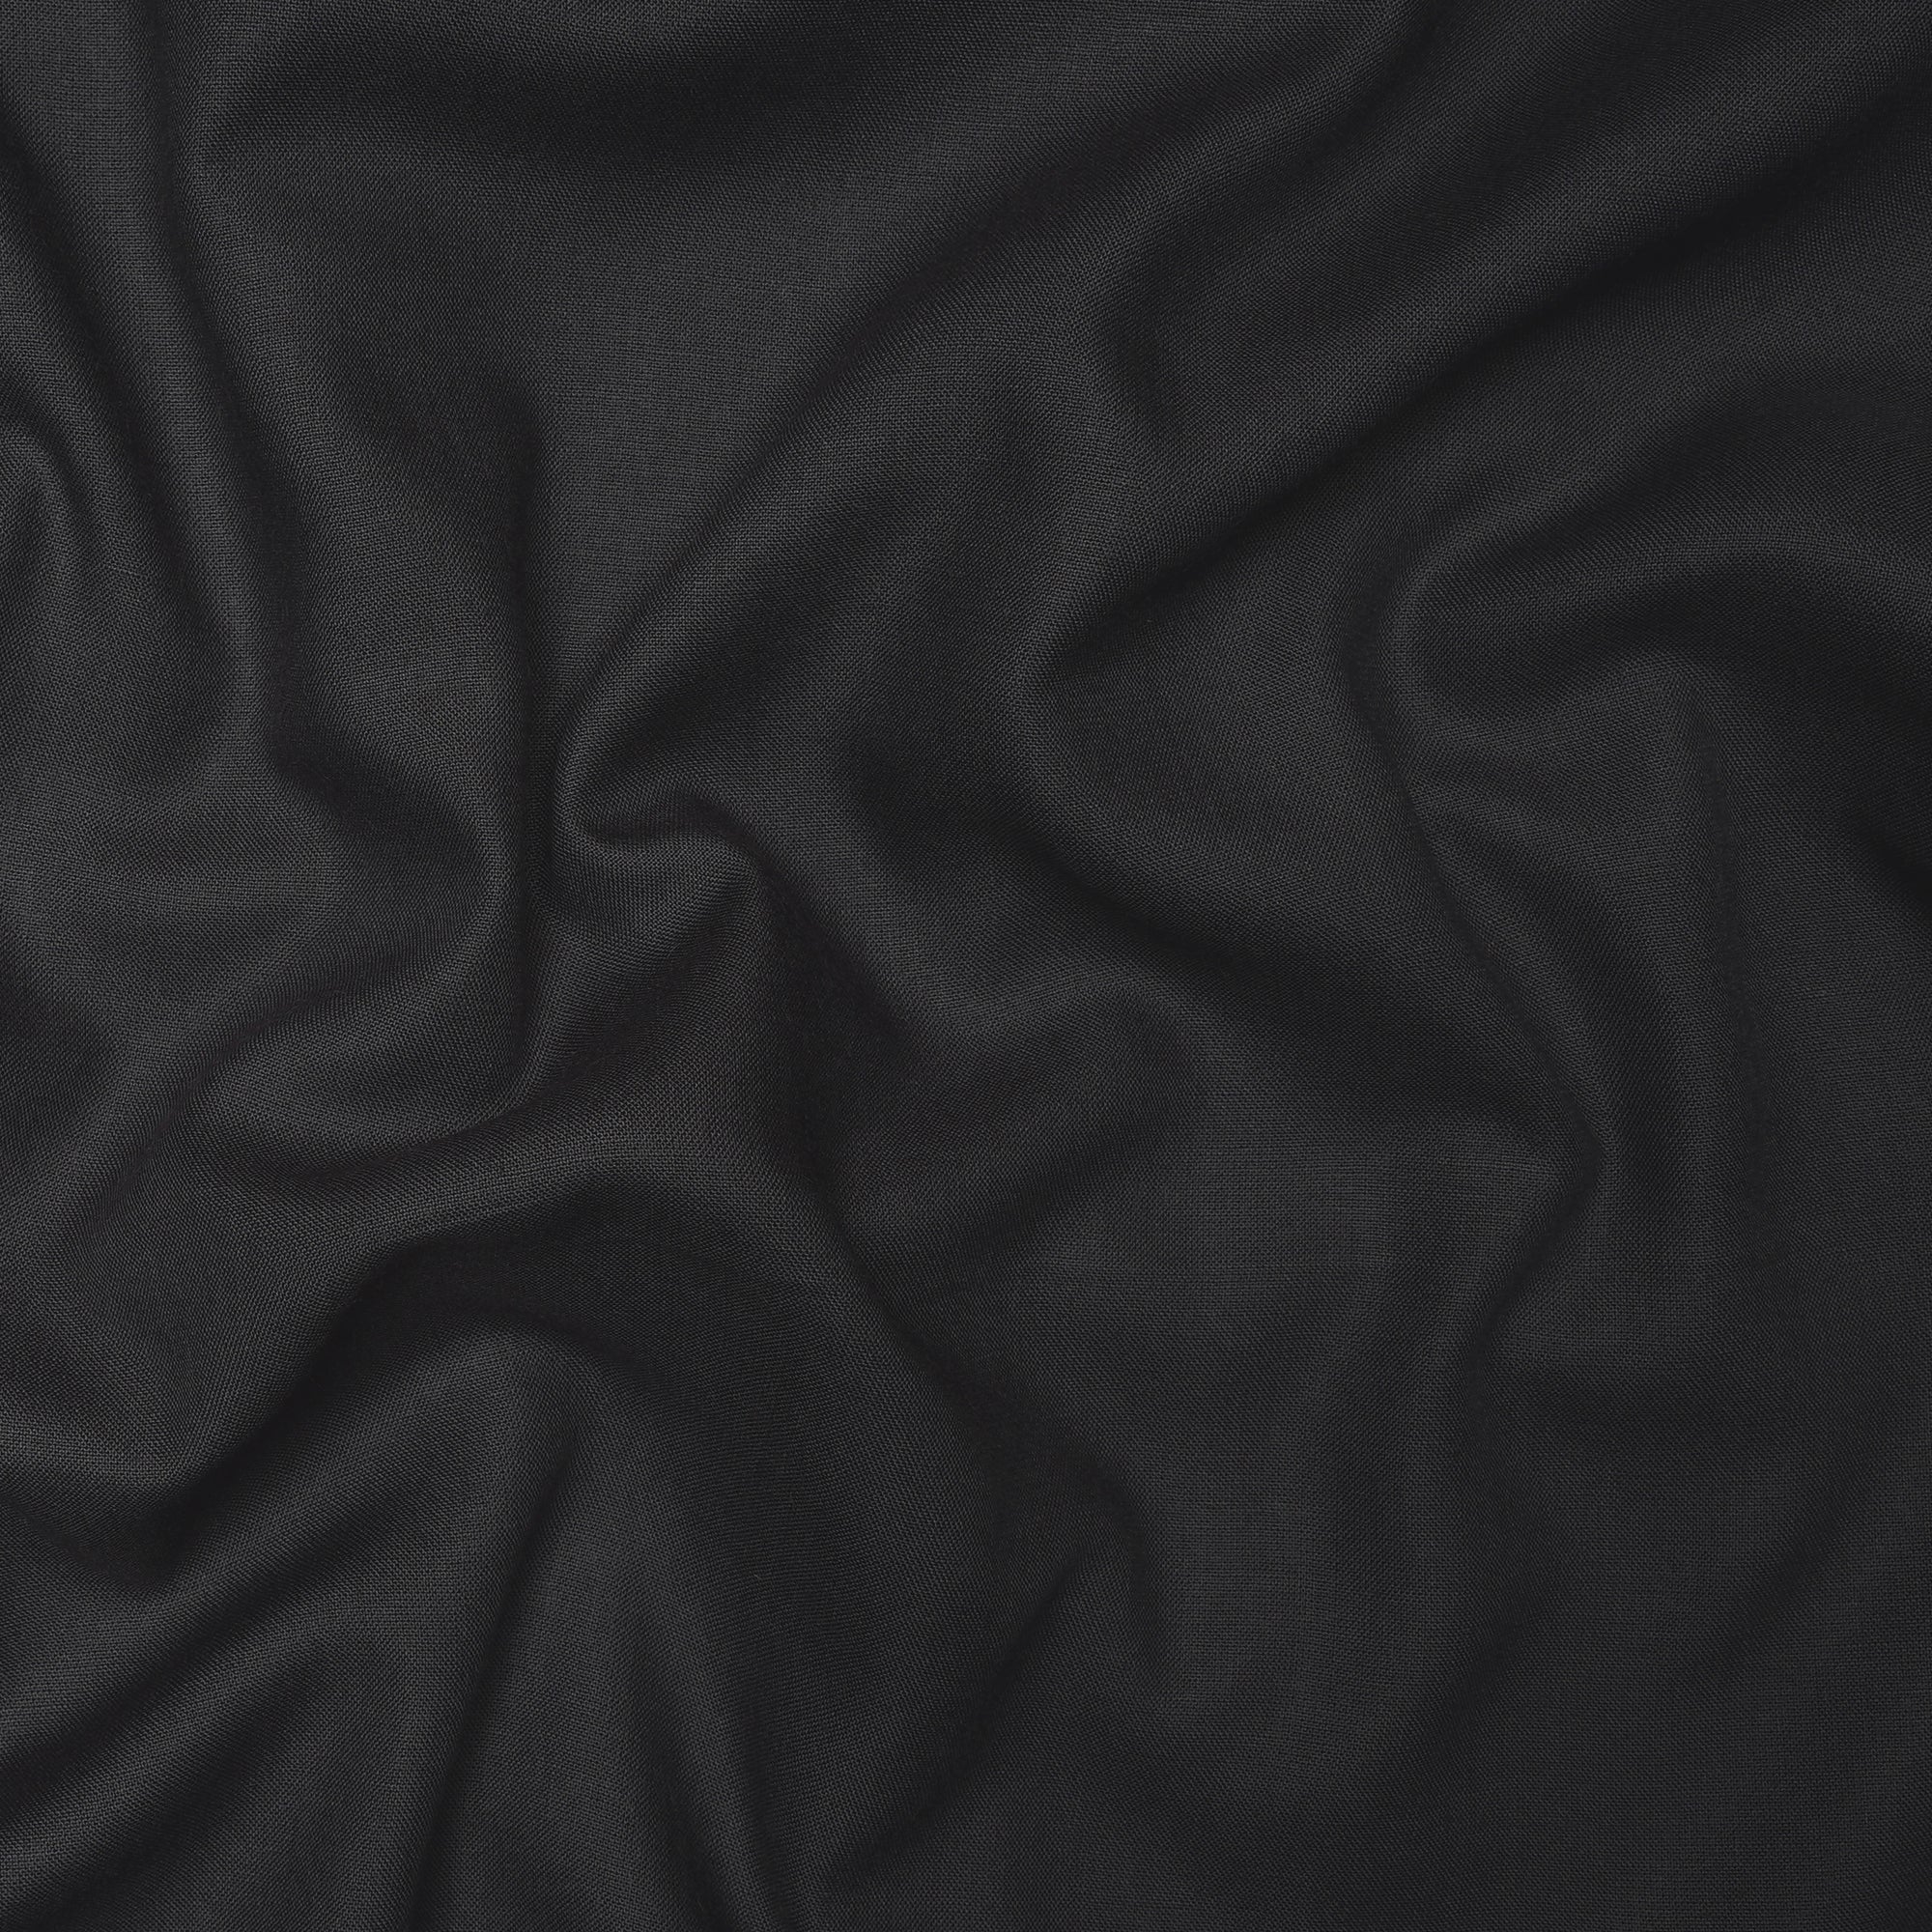 Charcoal Plain Mill Dyed Rayon Fabric